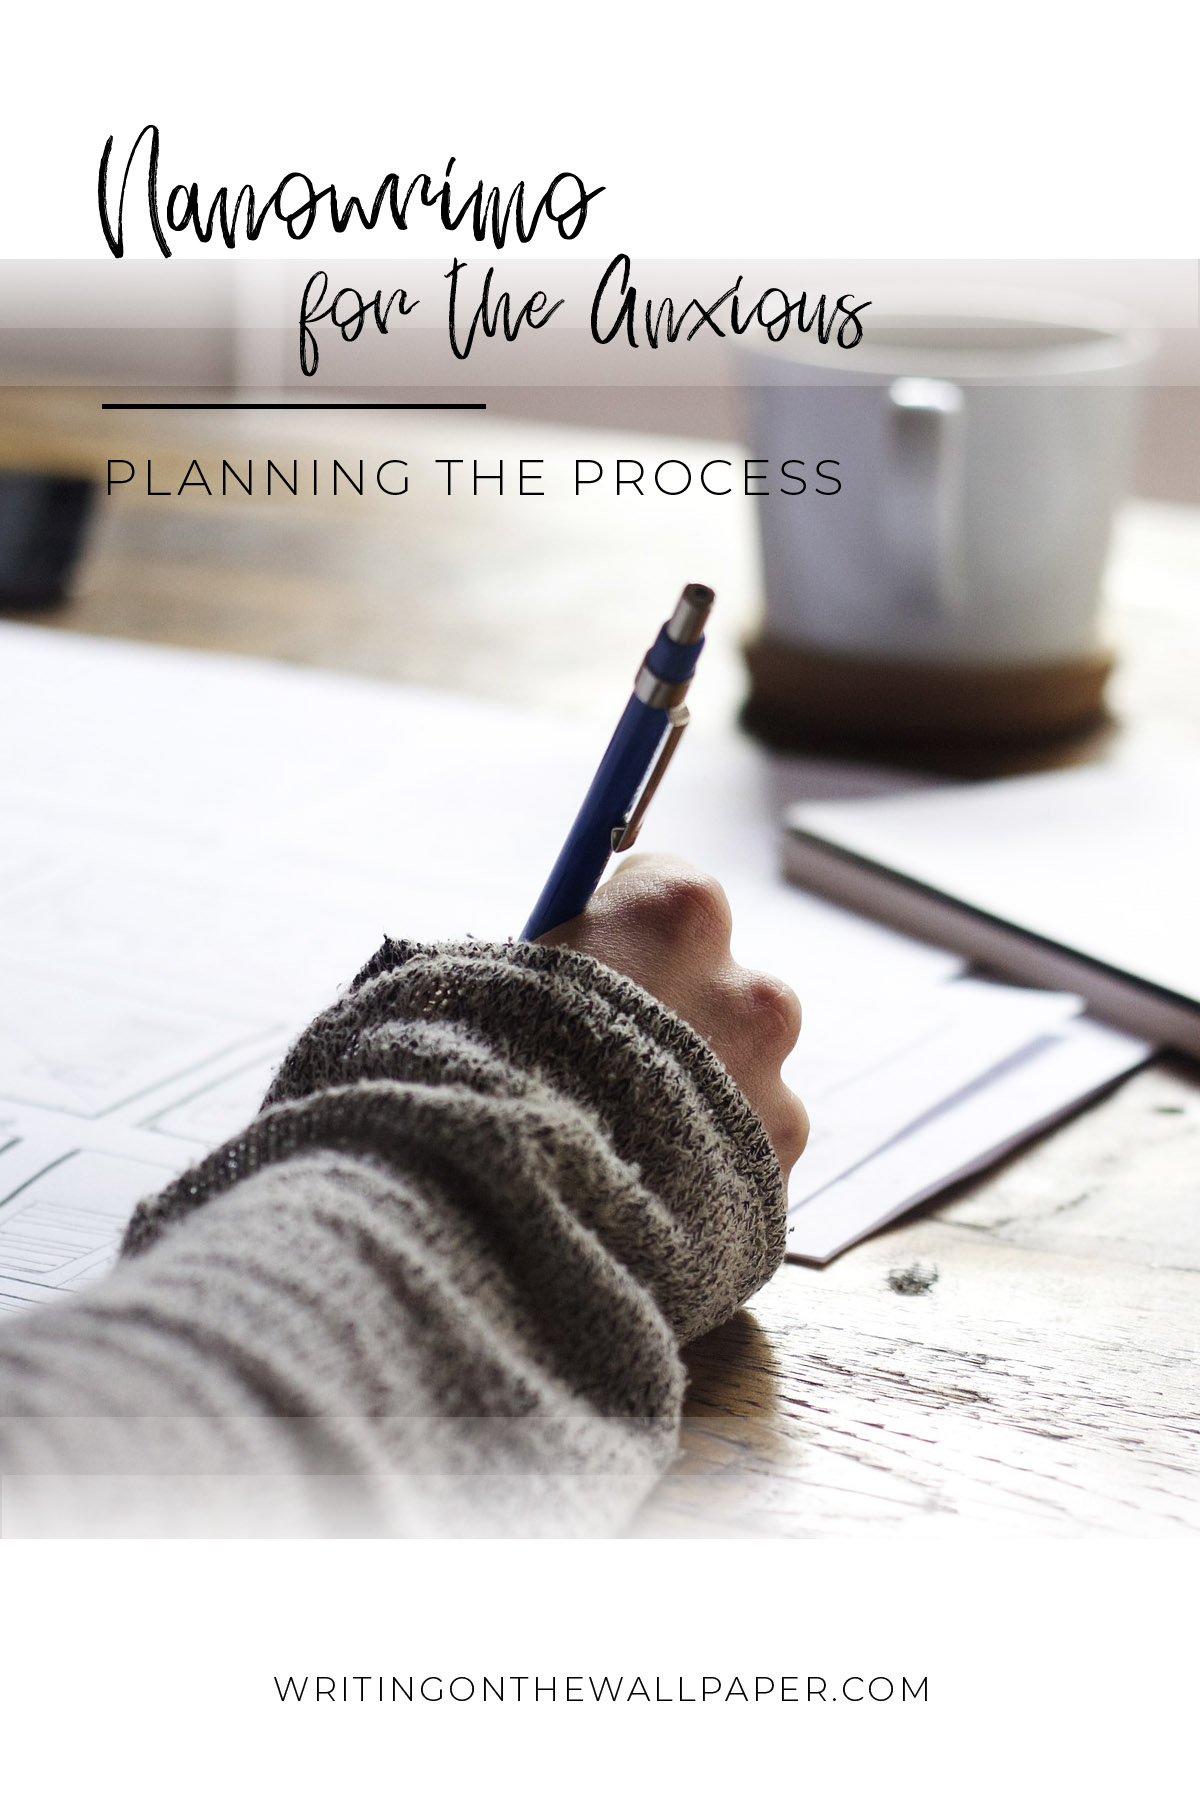 Title - Planning the Process